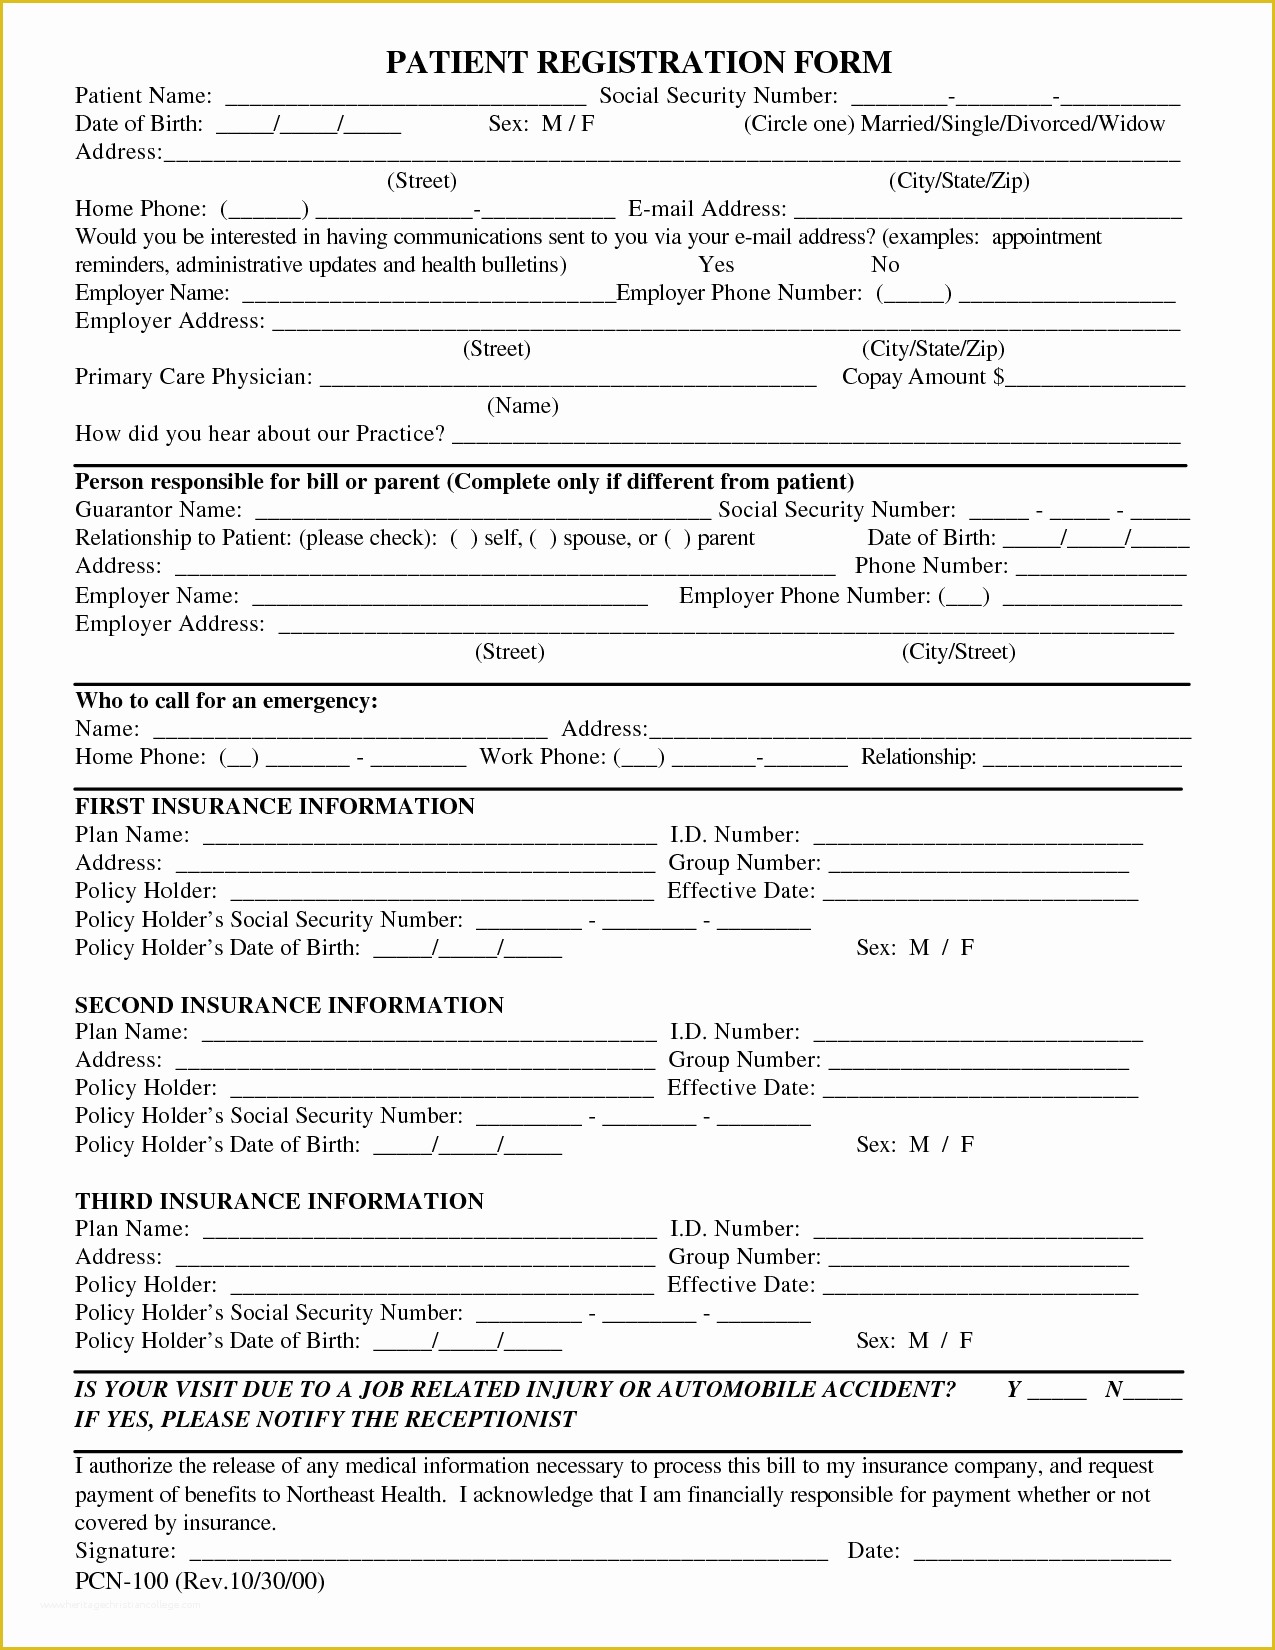 Free Patient Registration form Template Of Free Patient Registration form Template